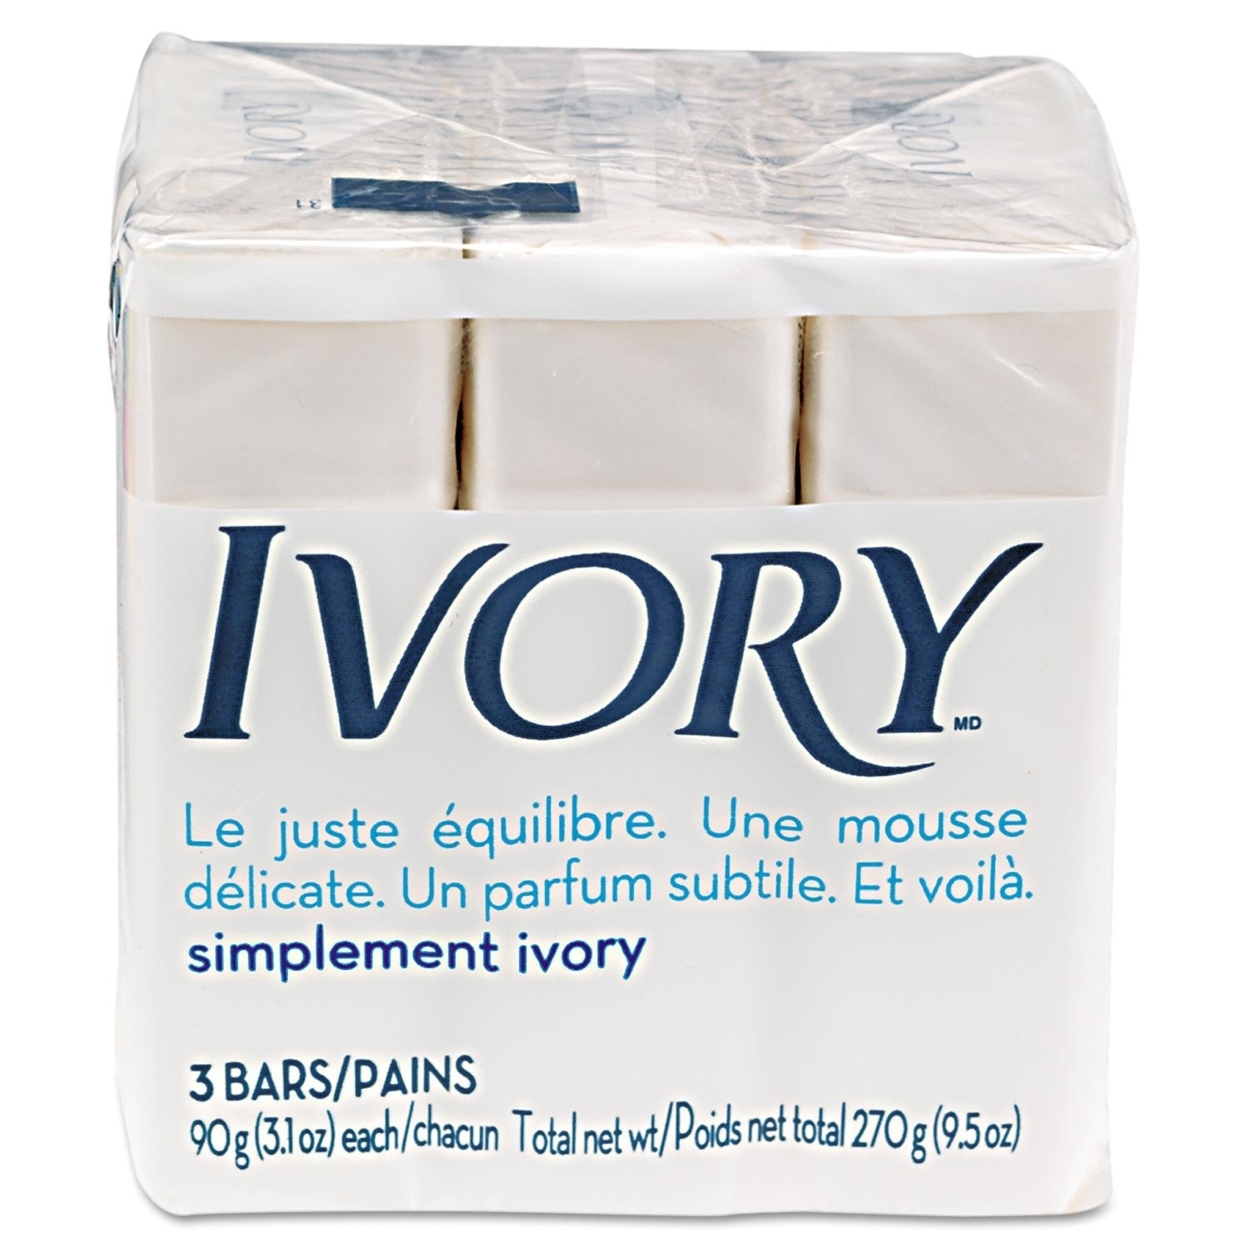 Ivory - Individually Wrapped Bath Soap, White, 3.1oz Bar, 3 Count